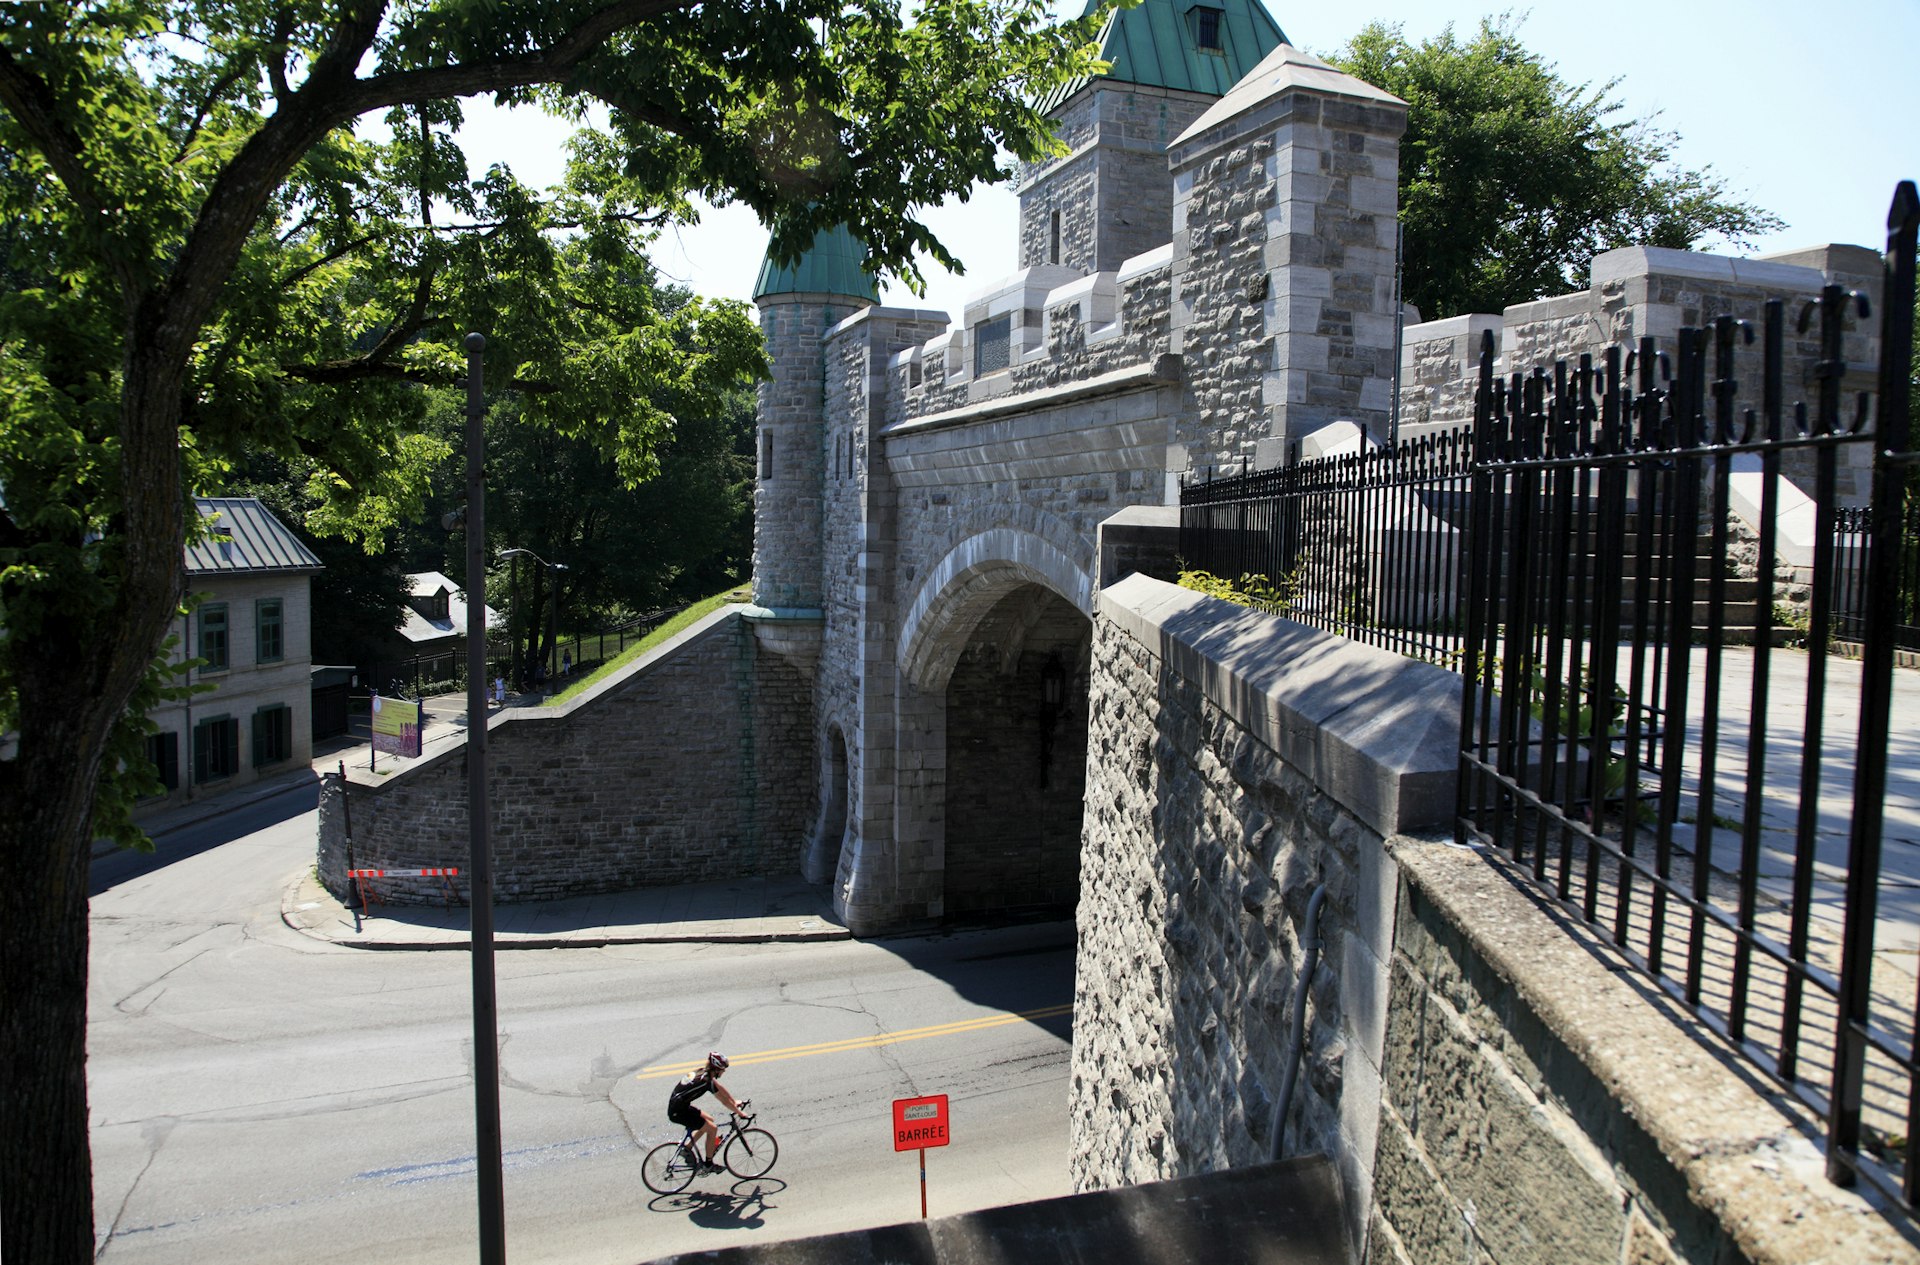 A lone cyclist about to pass through the Porte Saint-Louis in the Old Town, Québec City, Québec, Canada